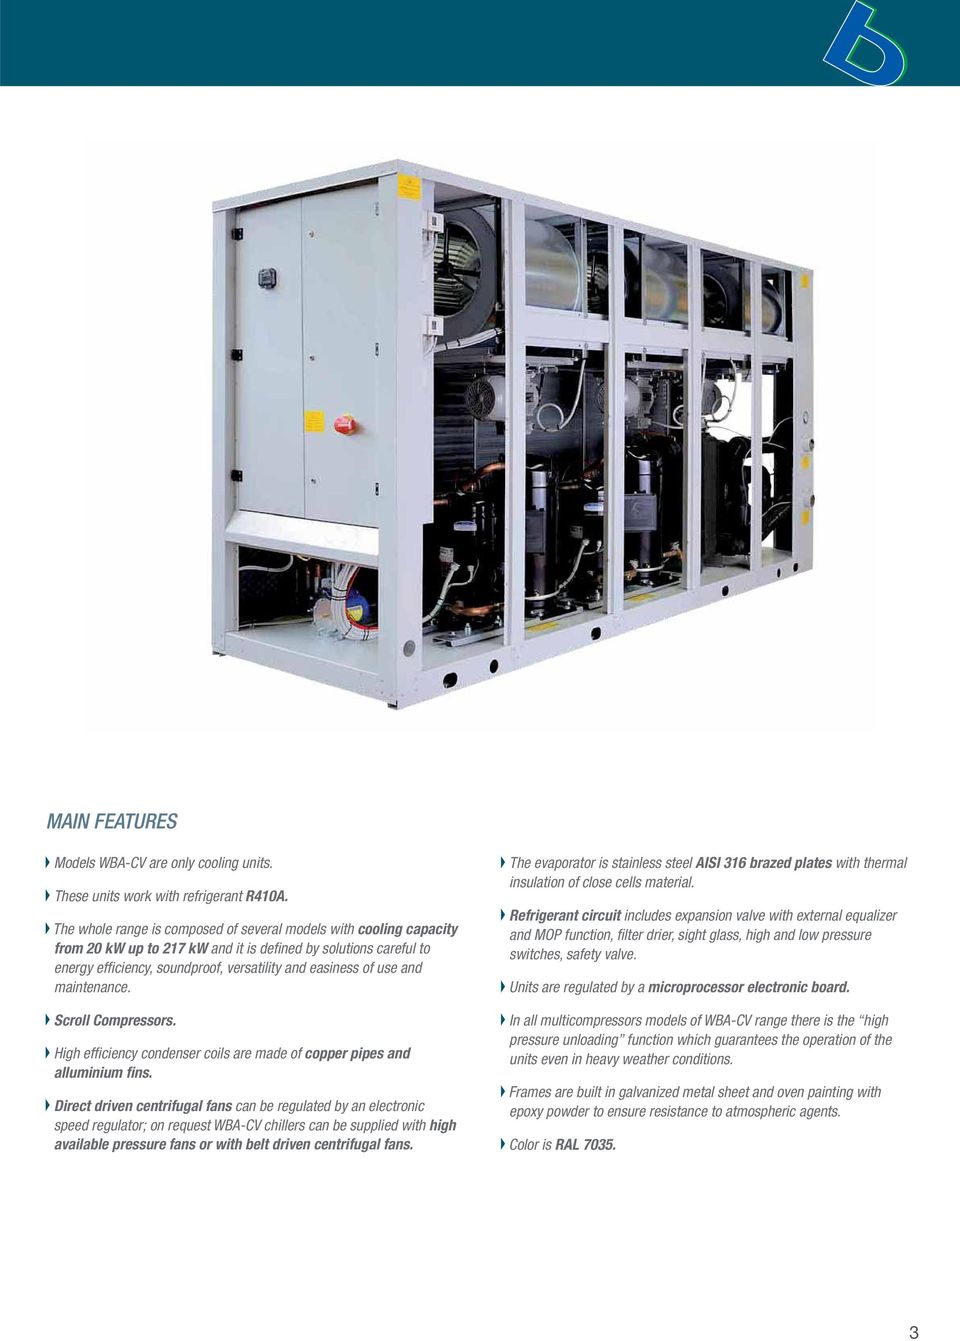 maintenance. Scroll Compressors. High efficiency condenser coils are made of copper pipes and alluminium fins.